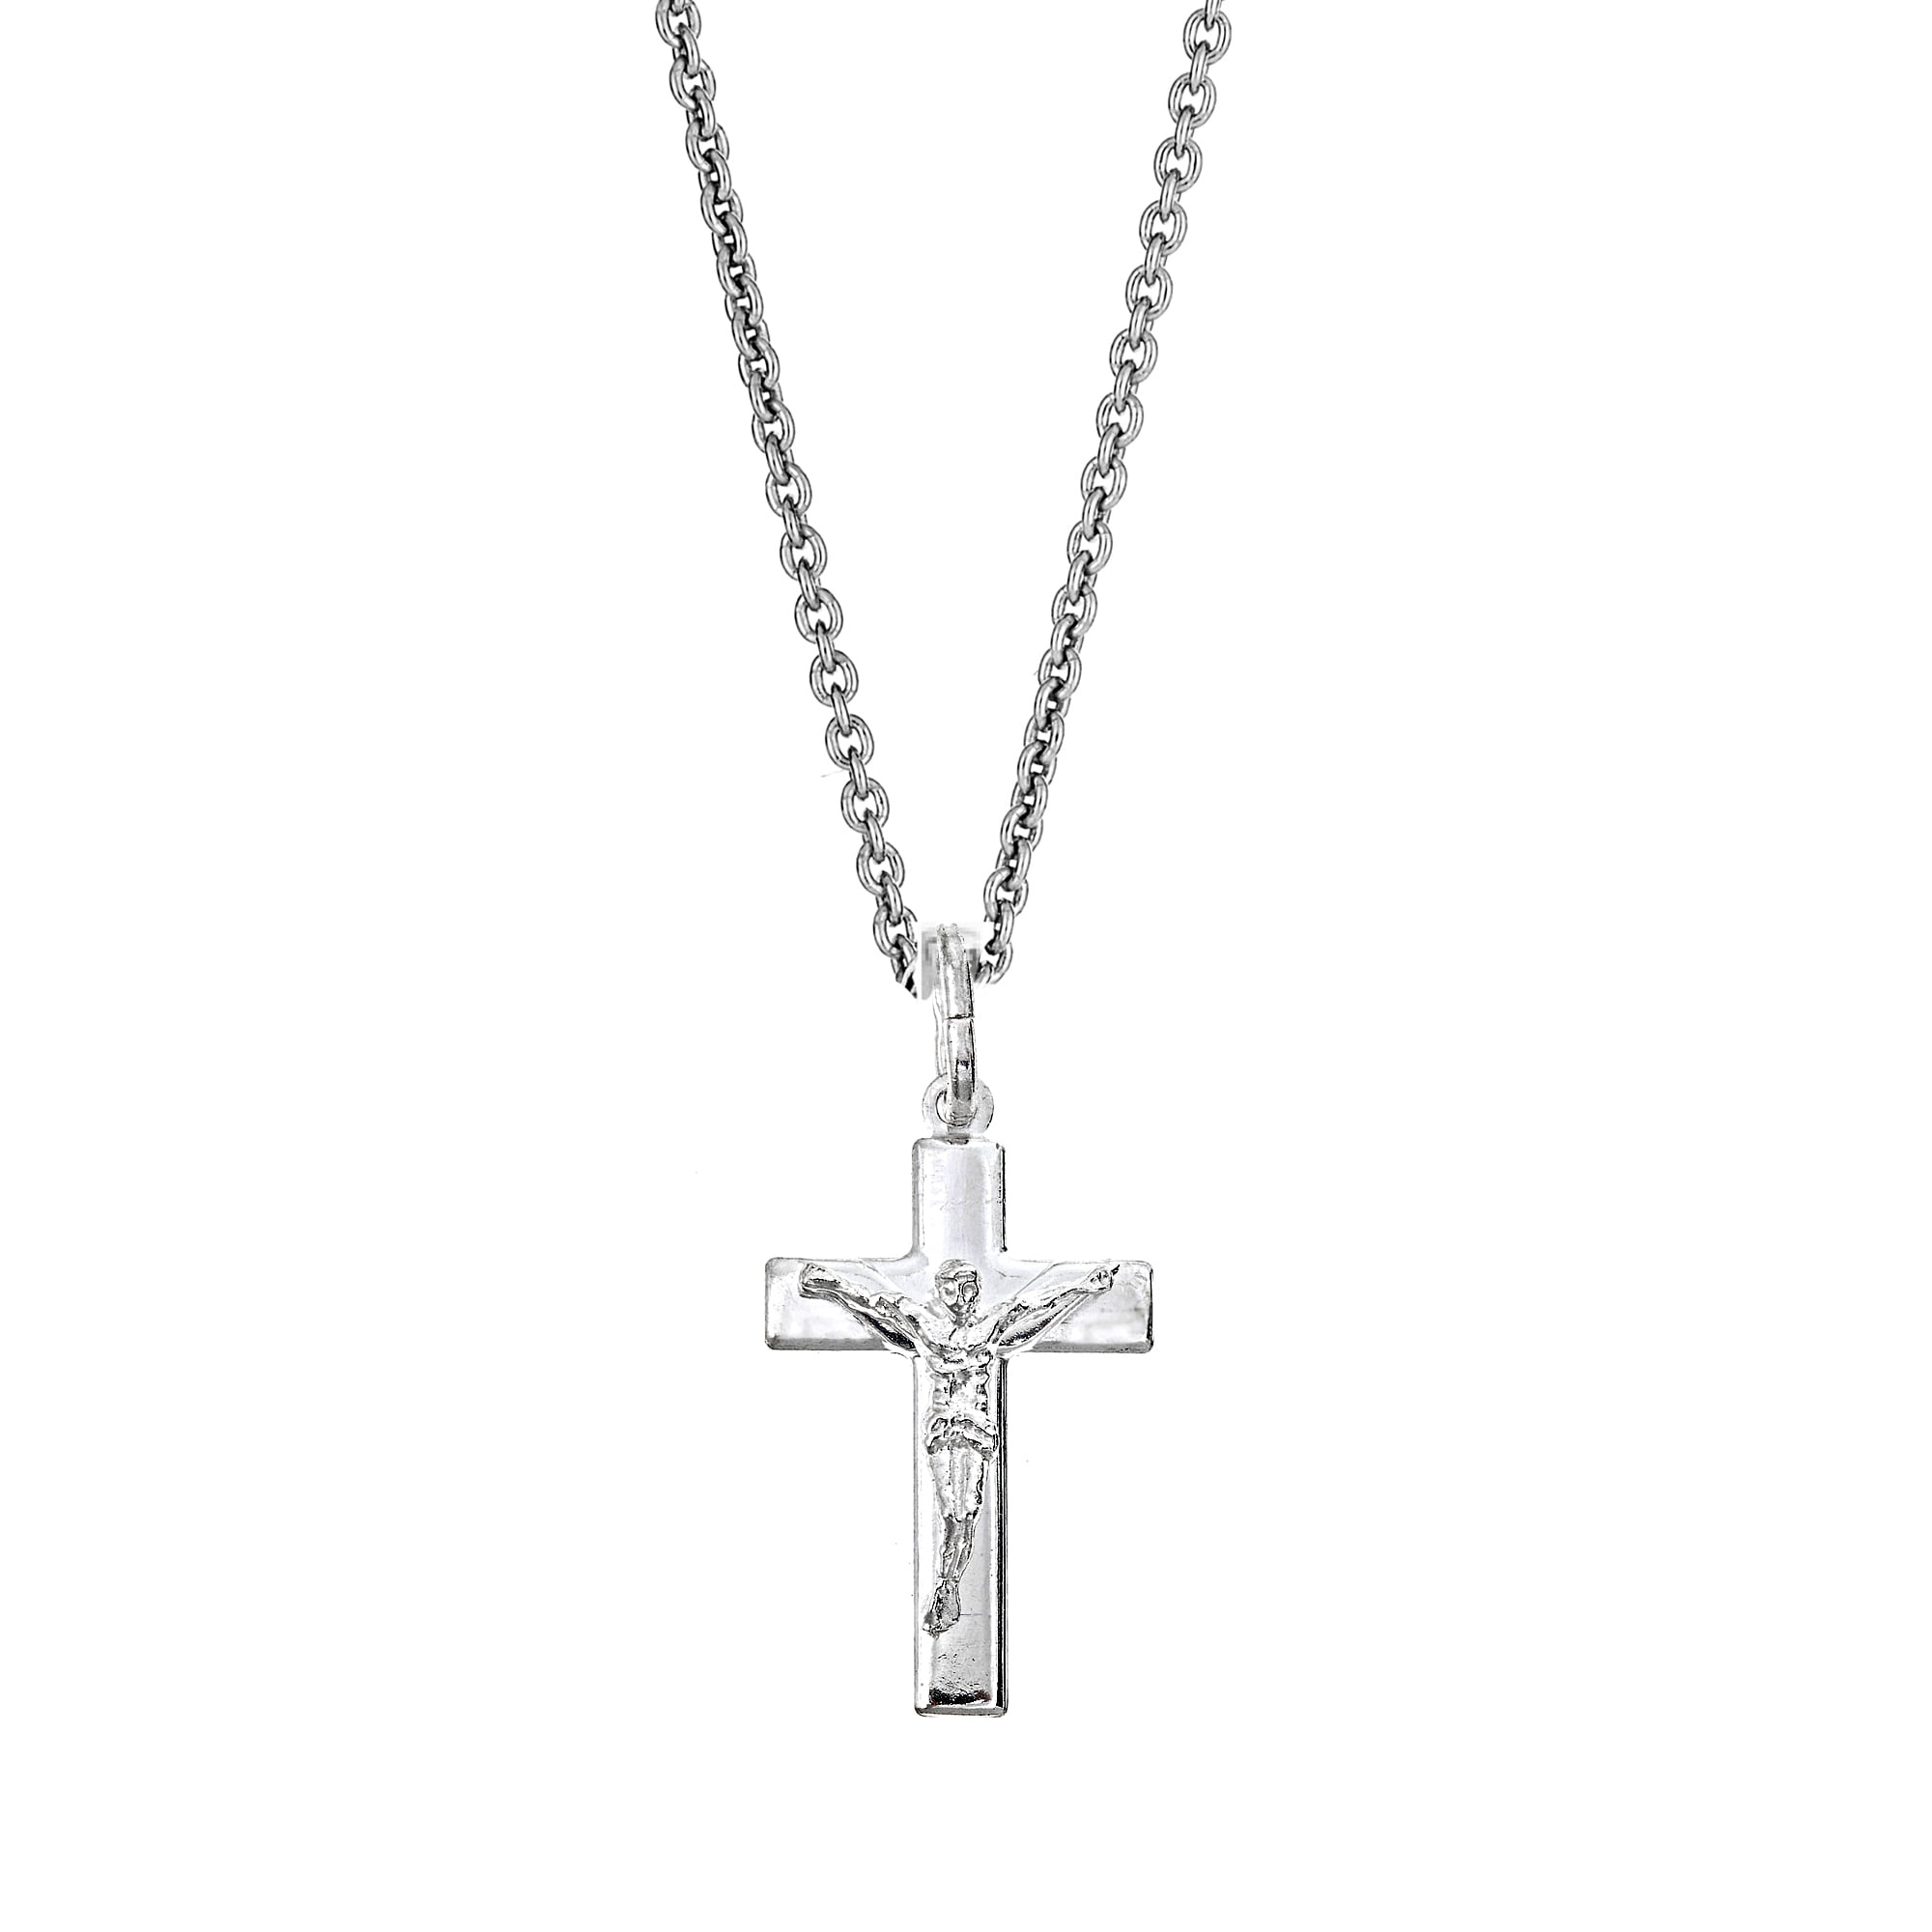 Sterling Silver Crucifix Pendant Necklace Roped Center 1 1/2 inch high sold w/ or w/o Chain 18-30 inch 